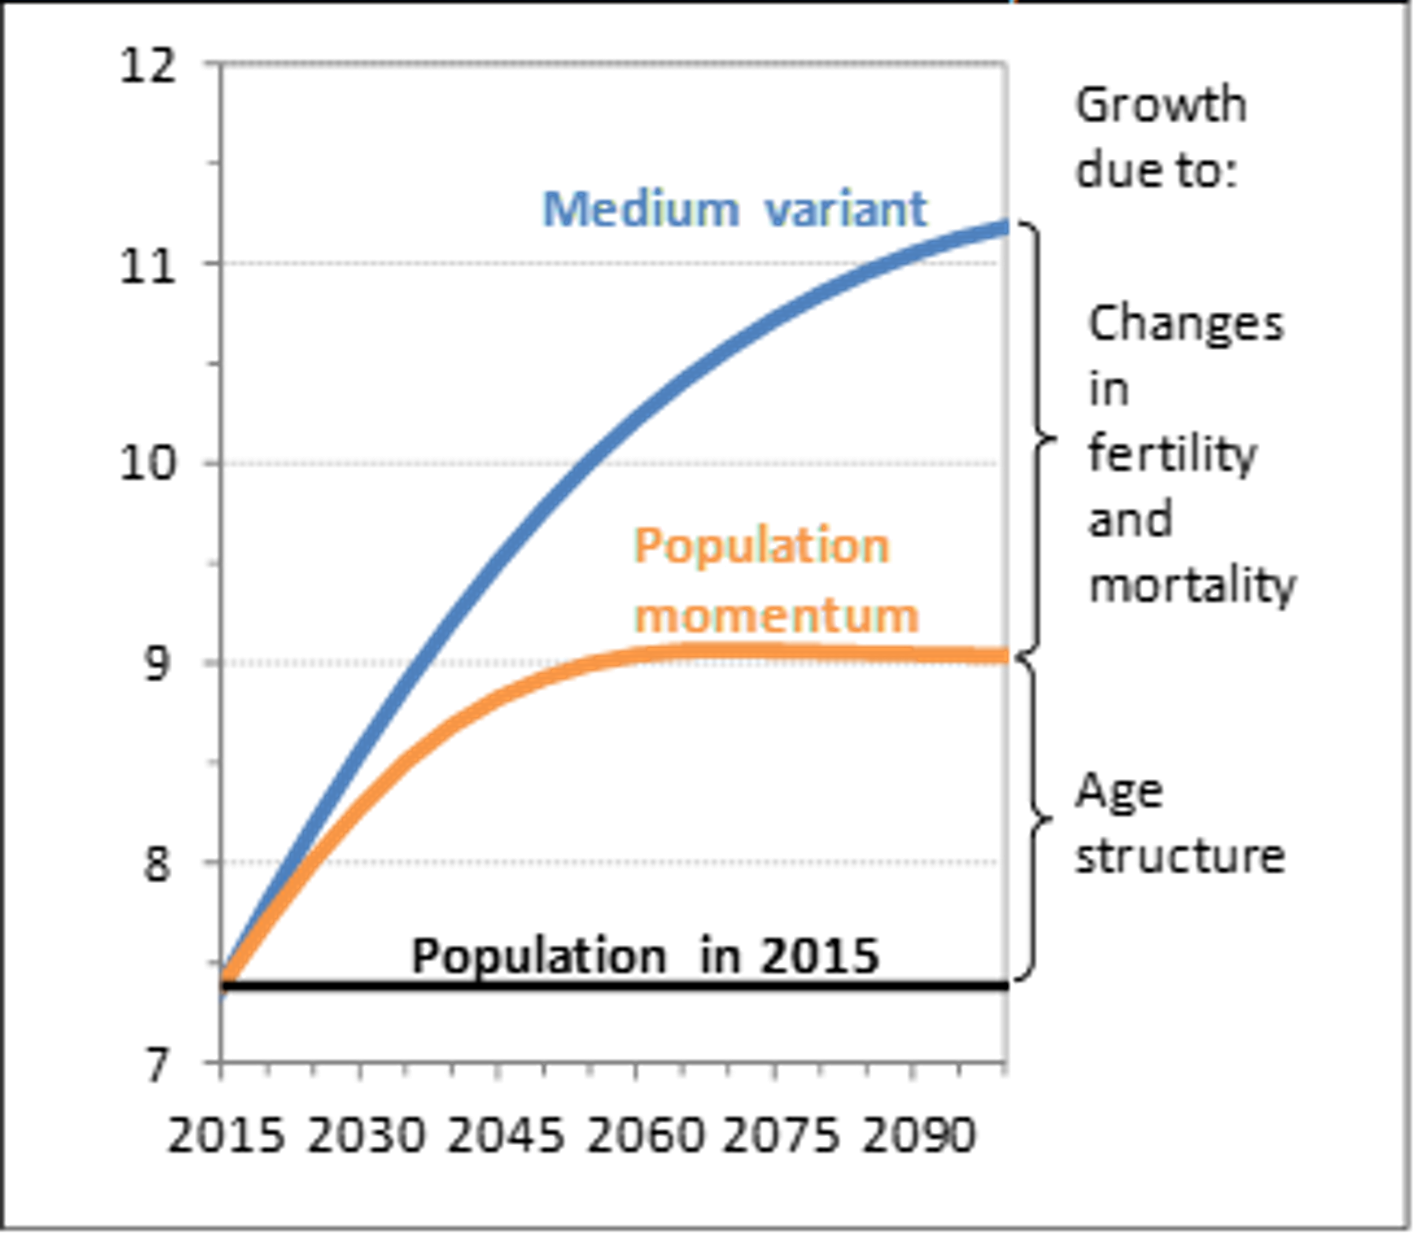 This graph shows expected world population on the vertical axis, and time on the horizontal axis. In 2015 the world population is less than 7.5 billion. According to the medium variant projection, it will grow at a decreasing rate, achieving about 11.2 billion in population by the year 2100. This is shown by a blue line. There is another, orange line. This shows the population growth that is expected to occur just because of population momentum. Just because of population momentum, the world's population is expected to grow at a decreasing rate until about 2060, generating 1.7 billion new people.